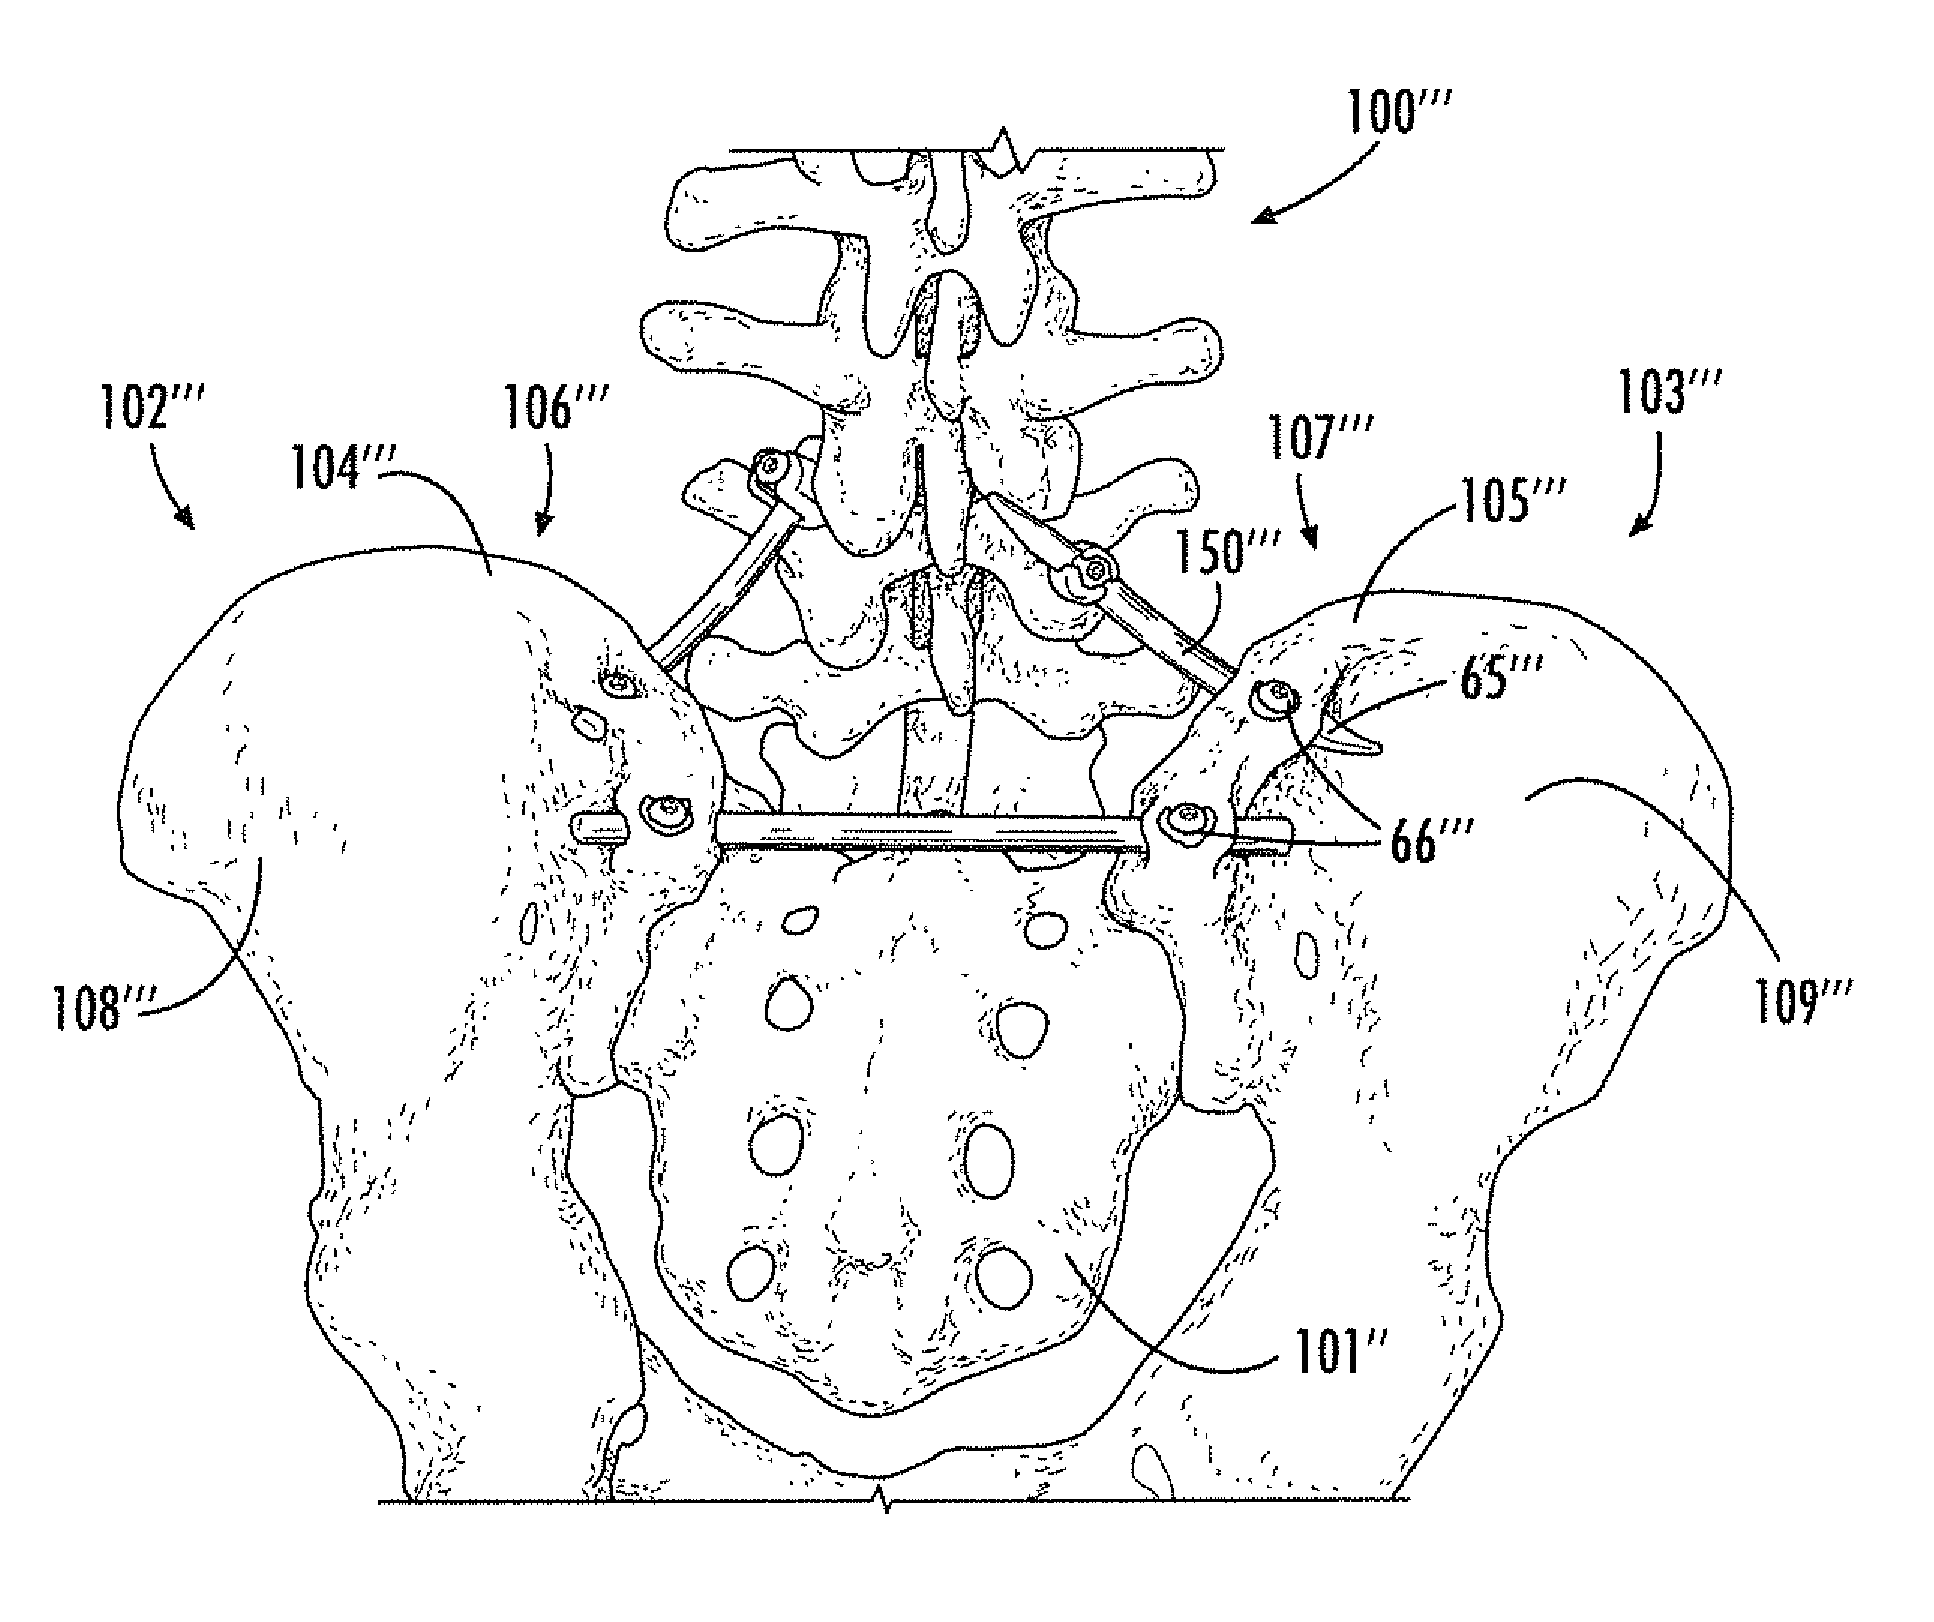 Surgical devices and methods providing sacroiliac stabilization